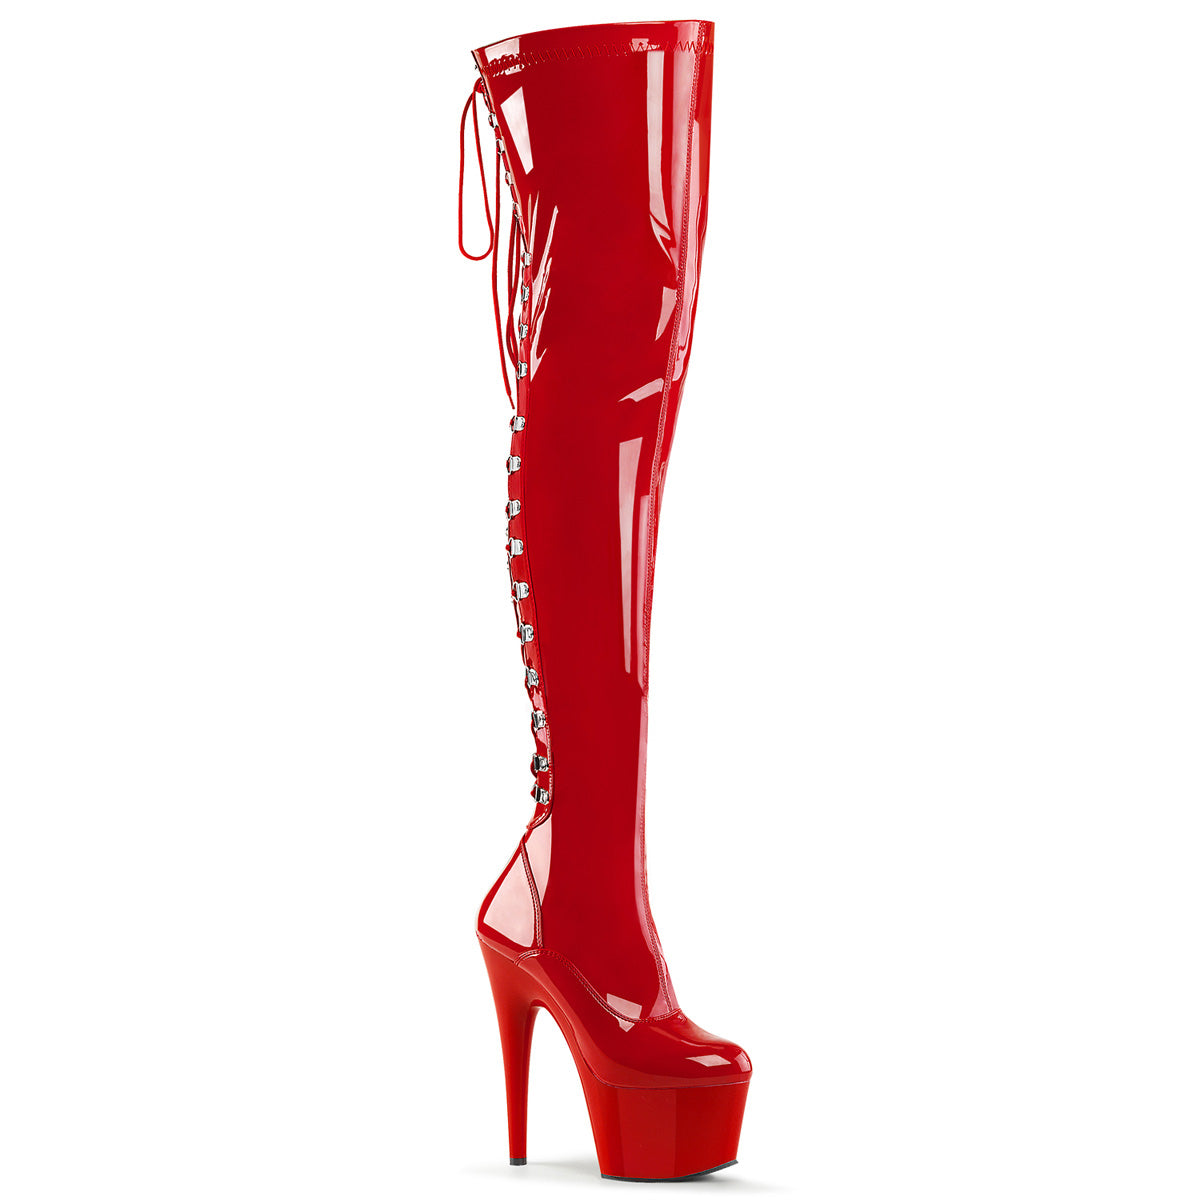 ADORE-3063 Pleaser 7 Inch Heel Red Pole Dancing Kinky Boots-Pleaser- Sexy Shoes